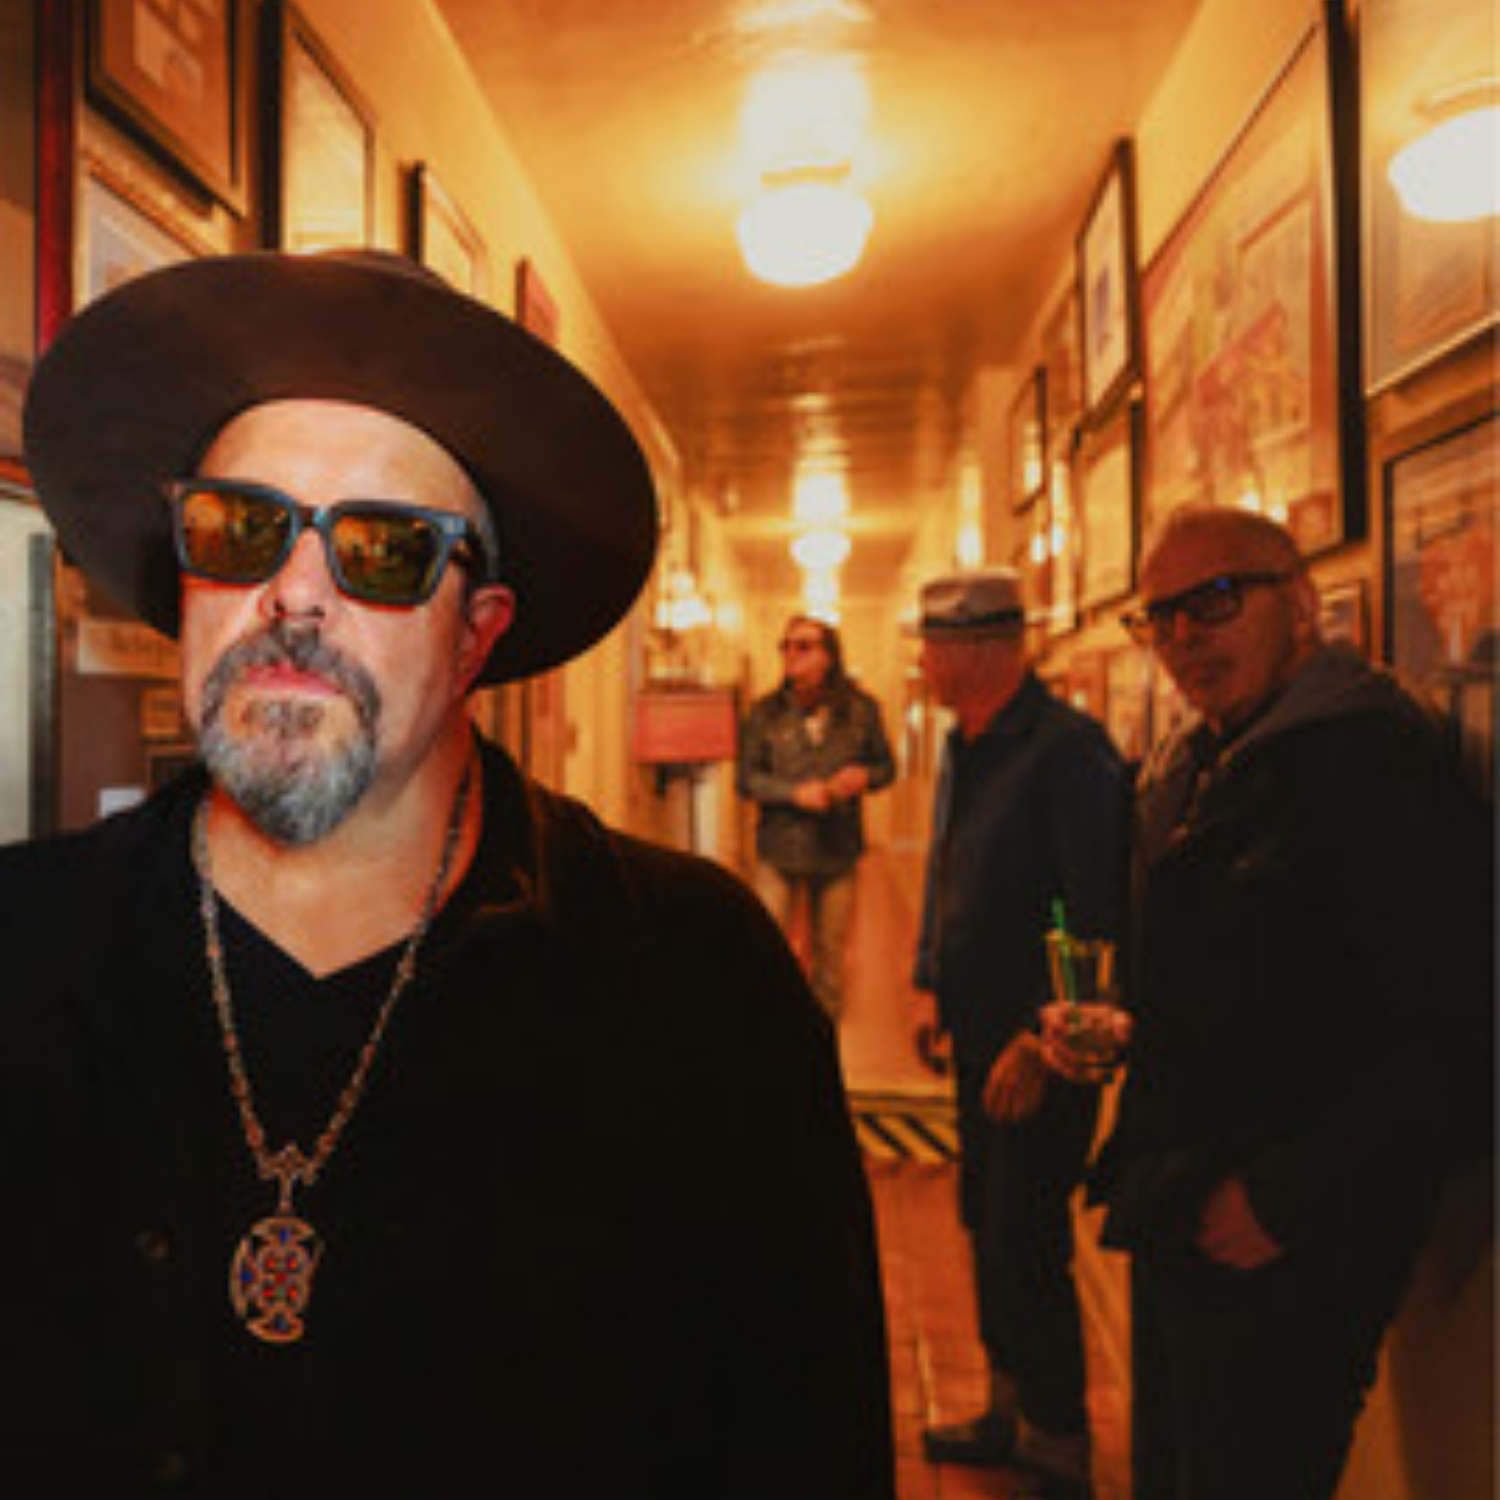 Four men from The Mavericks at varying depths wearing sunglasses and standing in a hallway.